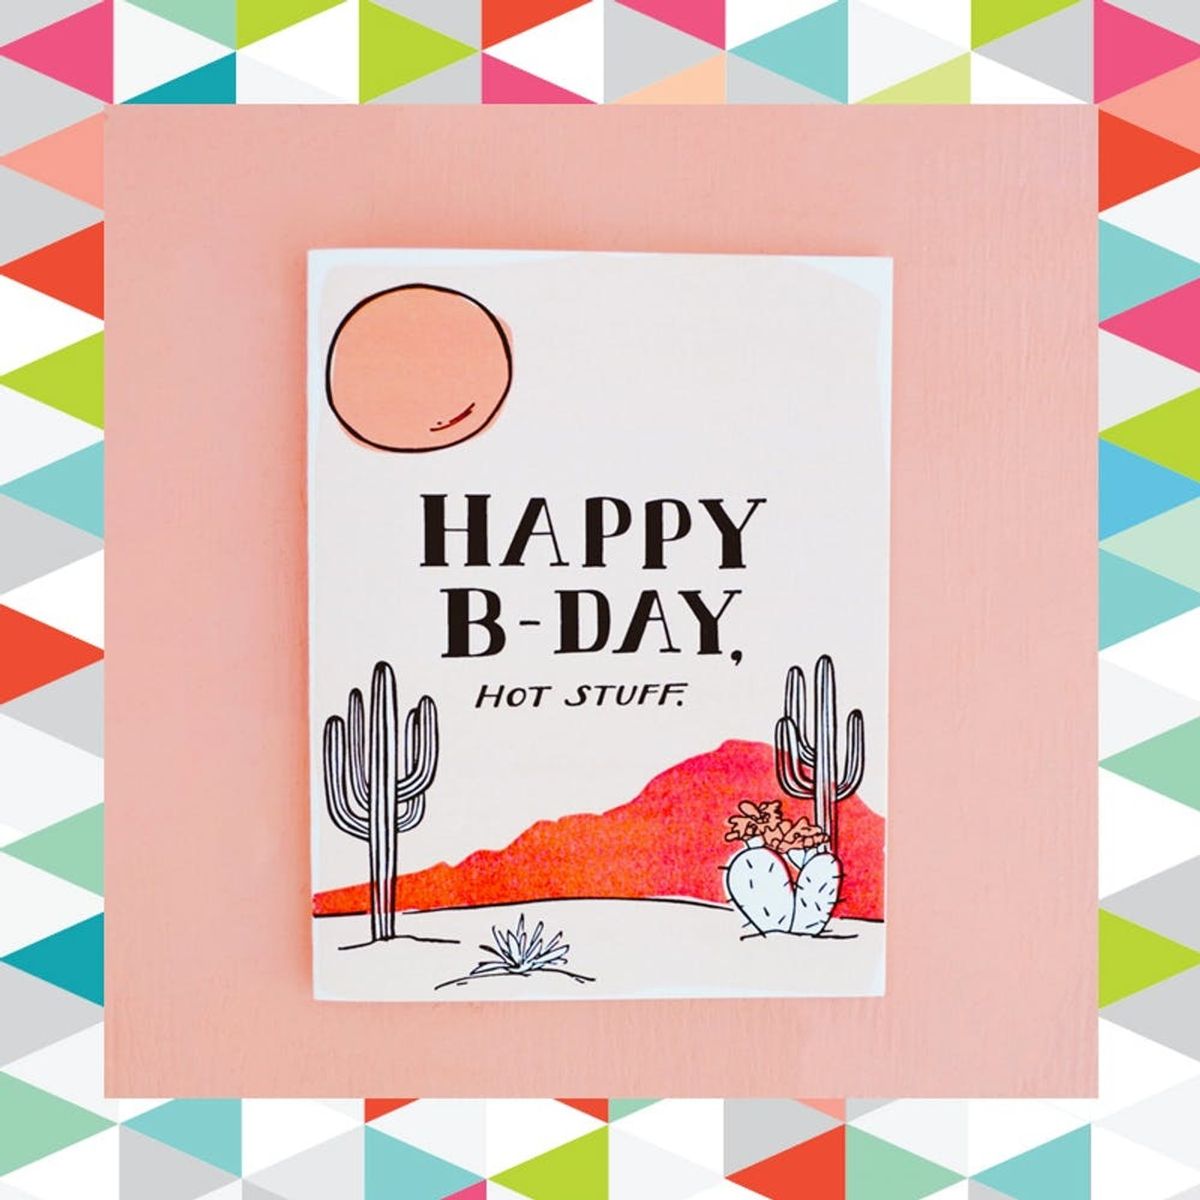 10 Bright + Colorful Birthday Cards to Send This Month